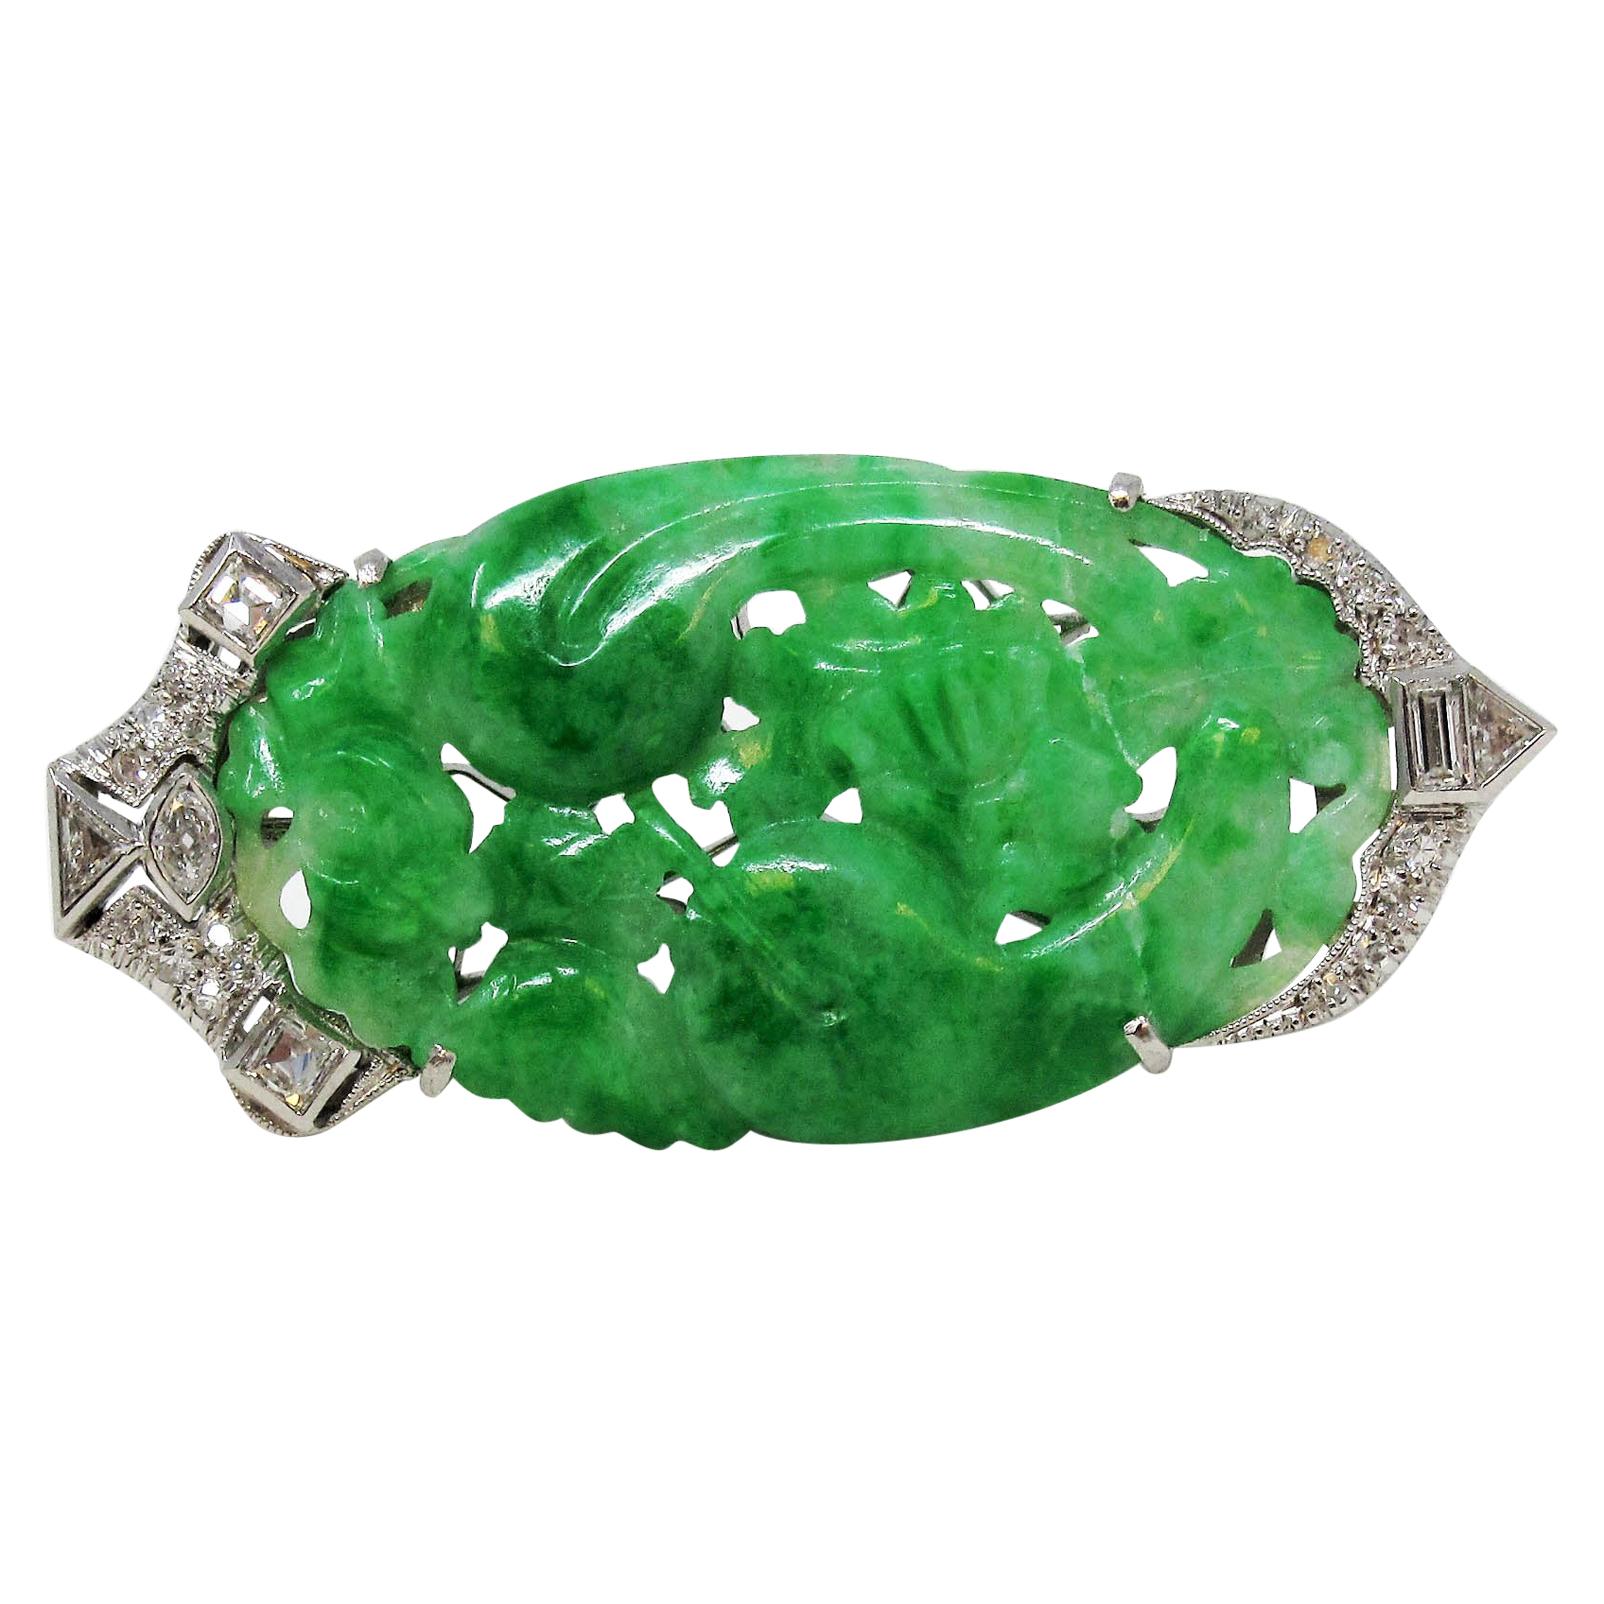 Vintage Carved Moss in Snow Jadeite Jade Brooch with Diamond Accents in Platinum